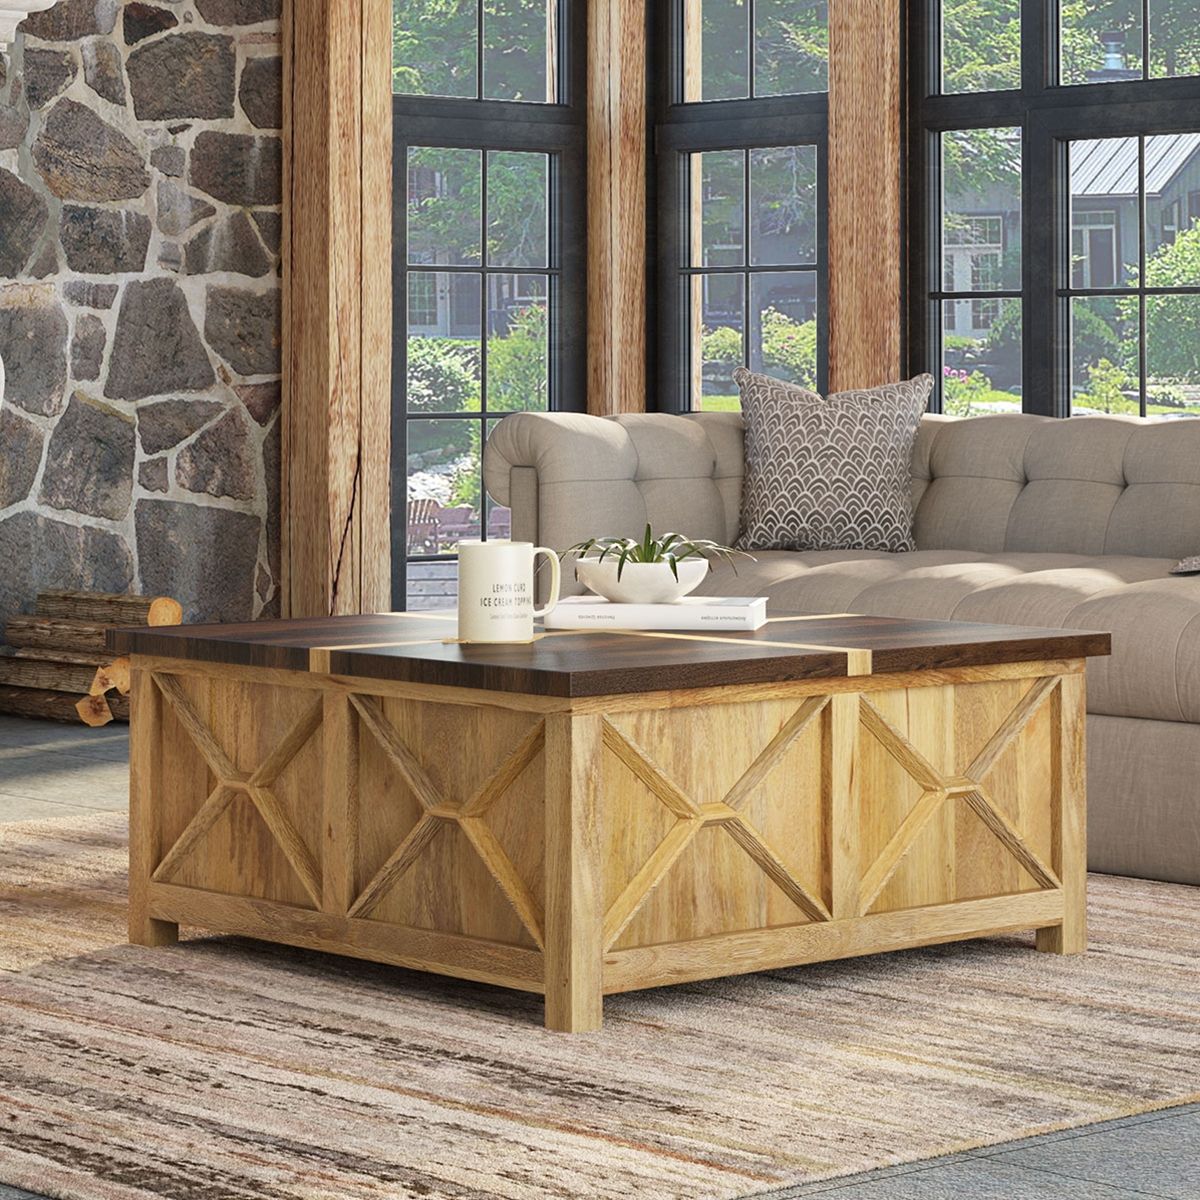 Acireale Rustic Square Farmhouse Coffee Table With Storage (View 9 of 15)